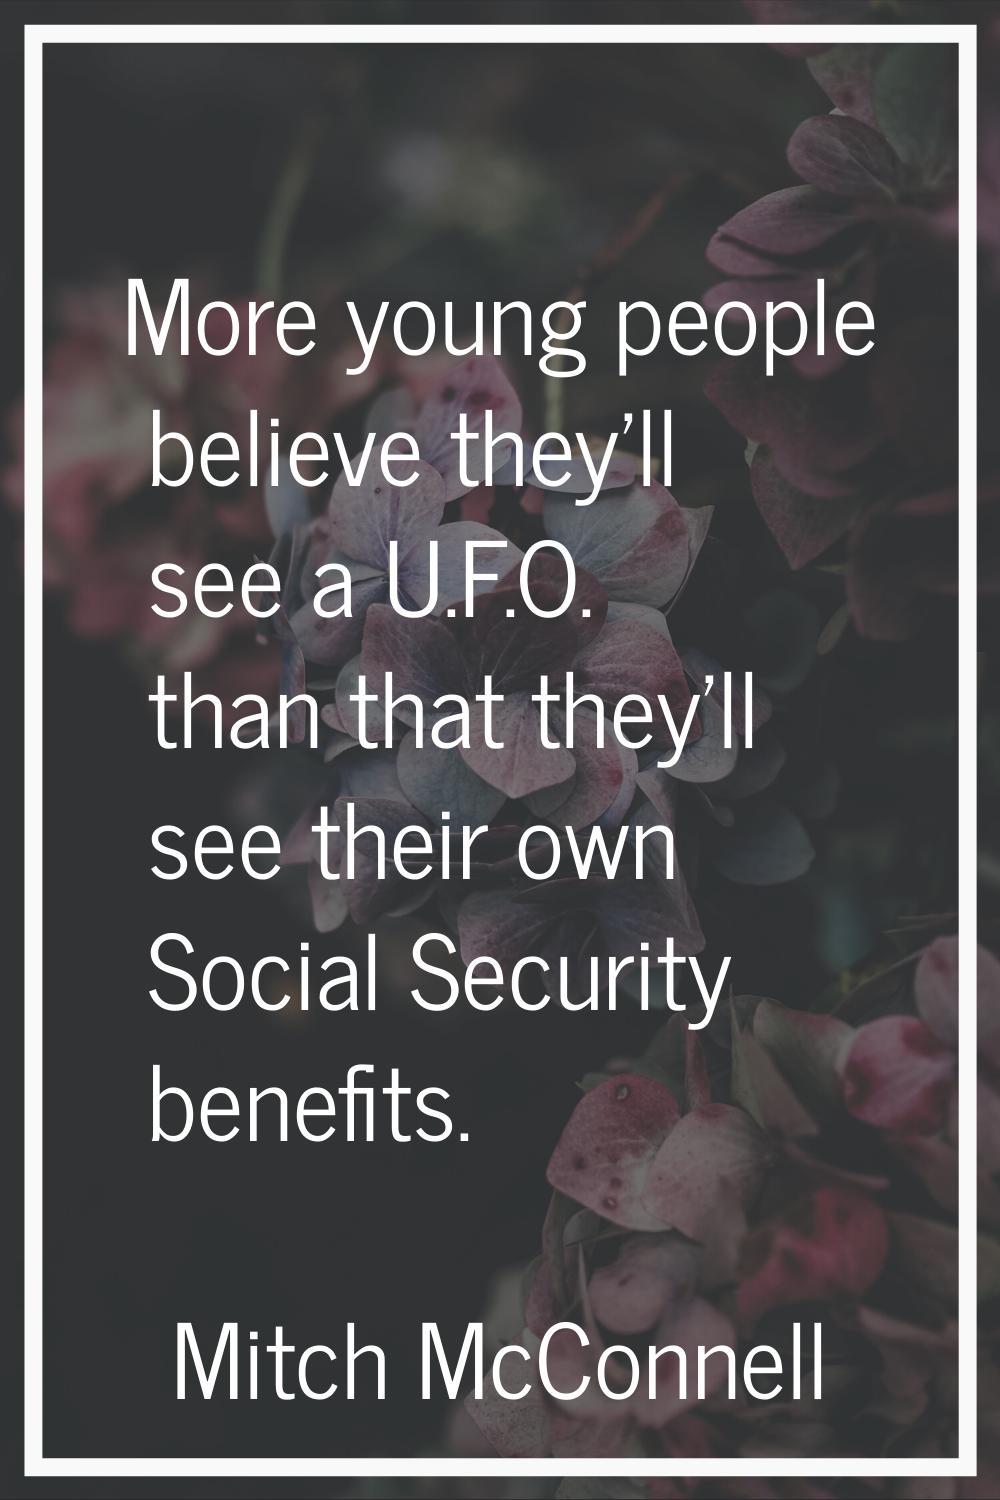 More young people believe they'll see a U.F.O. than that they'll see their own Social Security bene